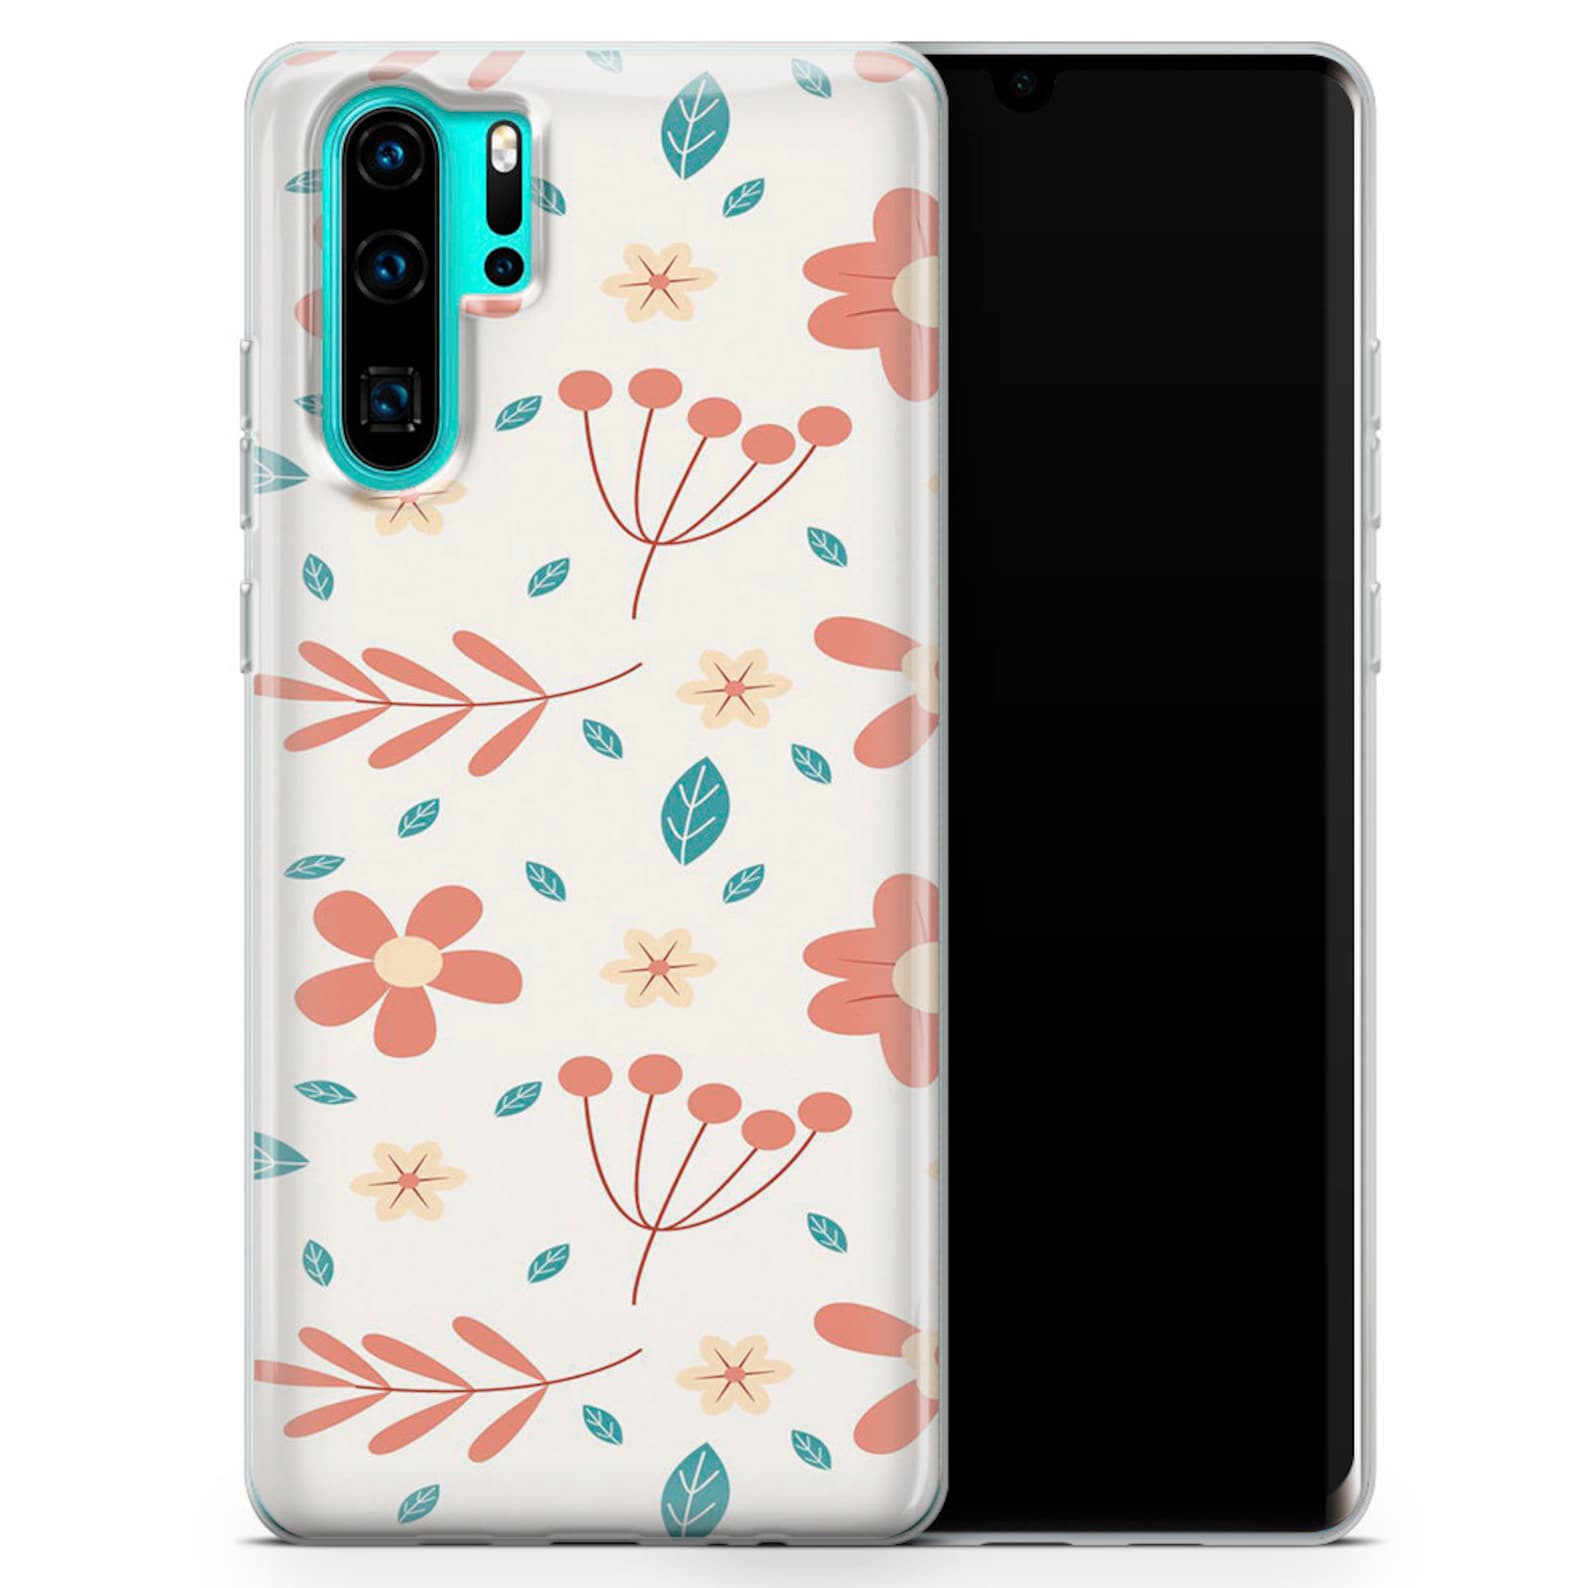 Aesthetic Floral Art Phone Case fit for Huawei Mate 20 Huawei | Etsy